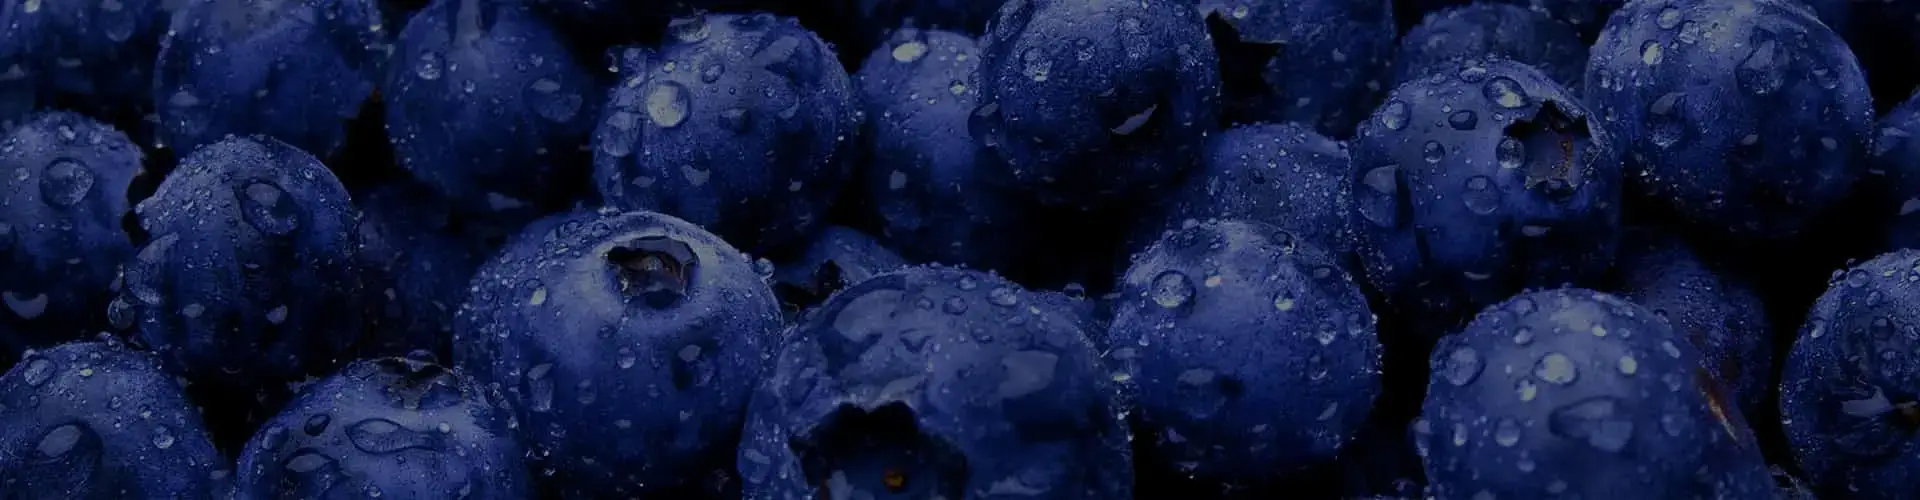 Berries & Blueberry image